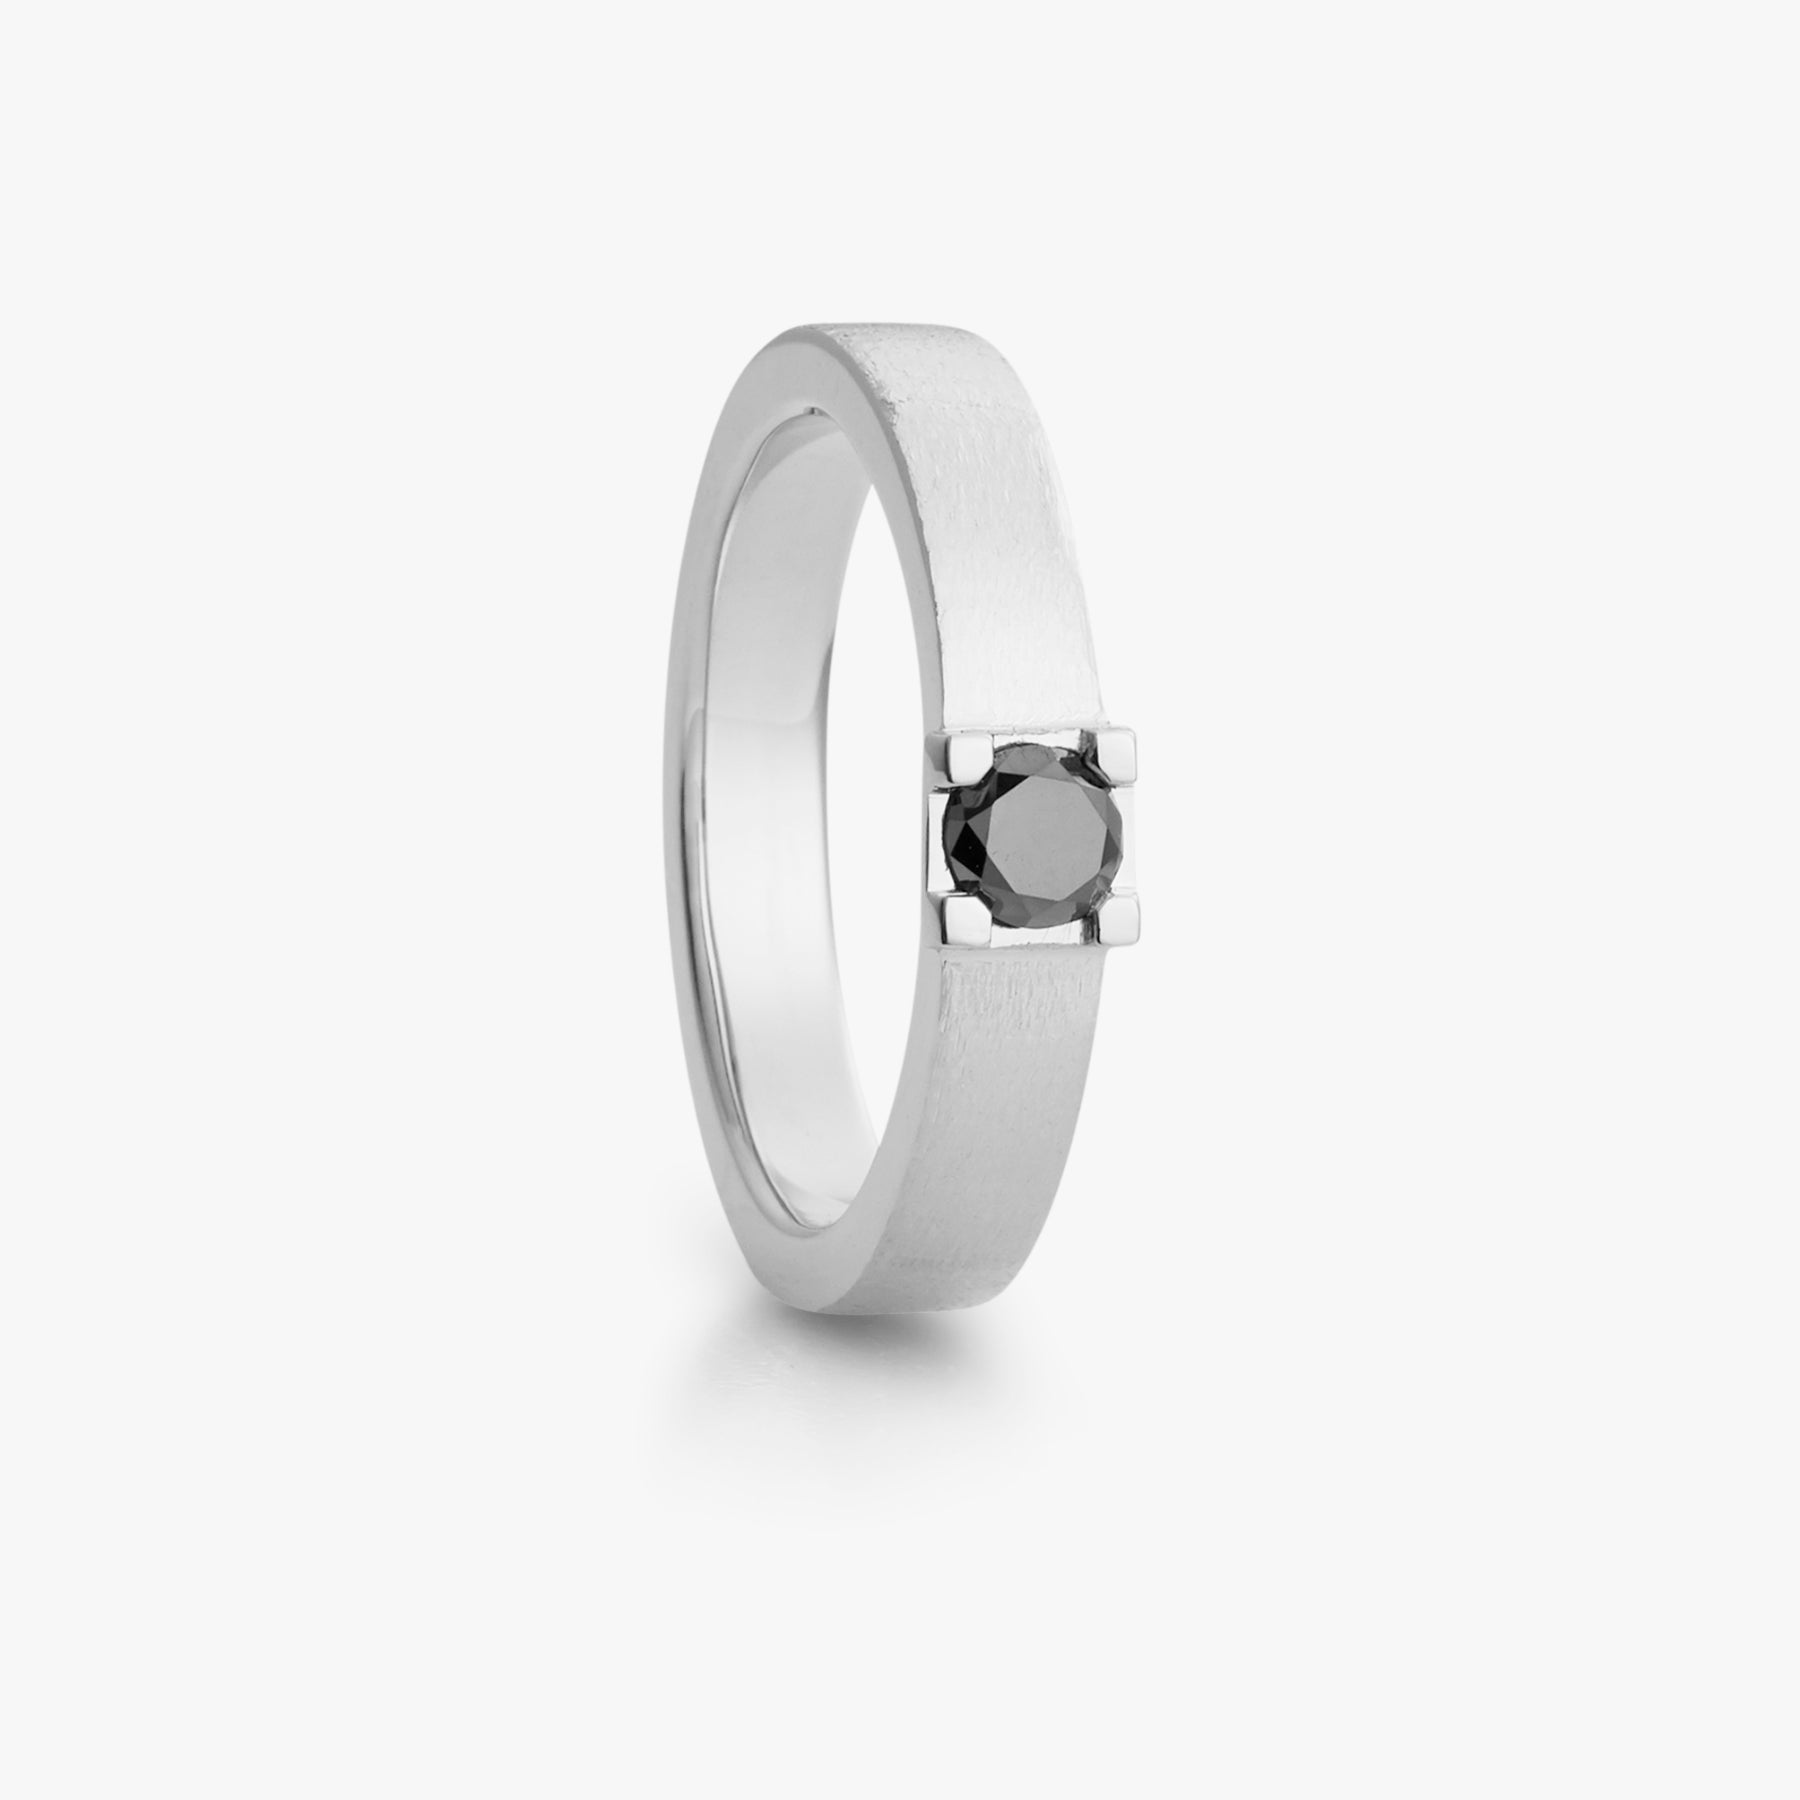 Magnificent white gold and black diamond ring, men's